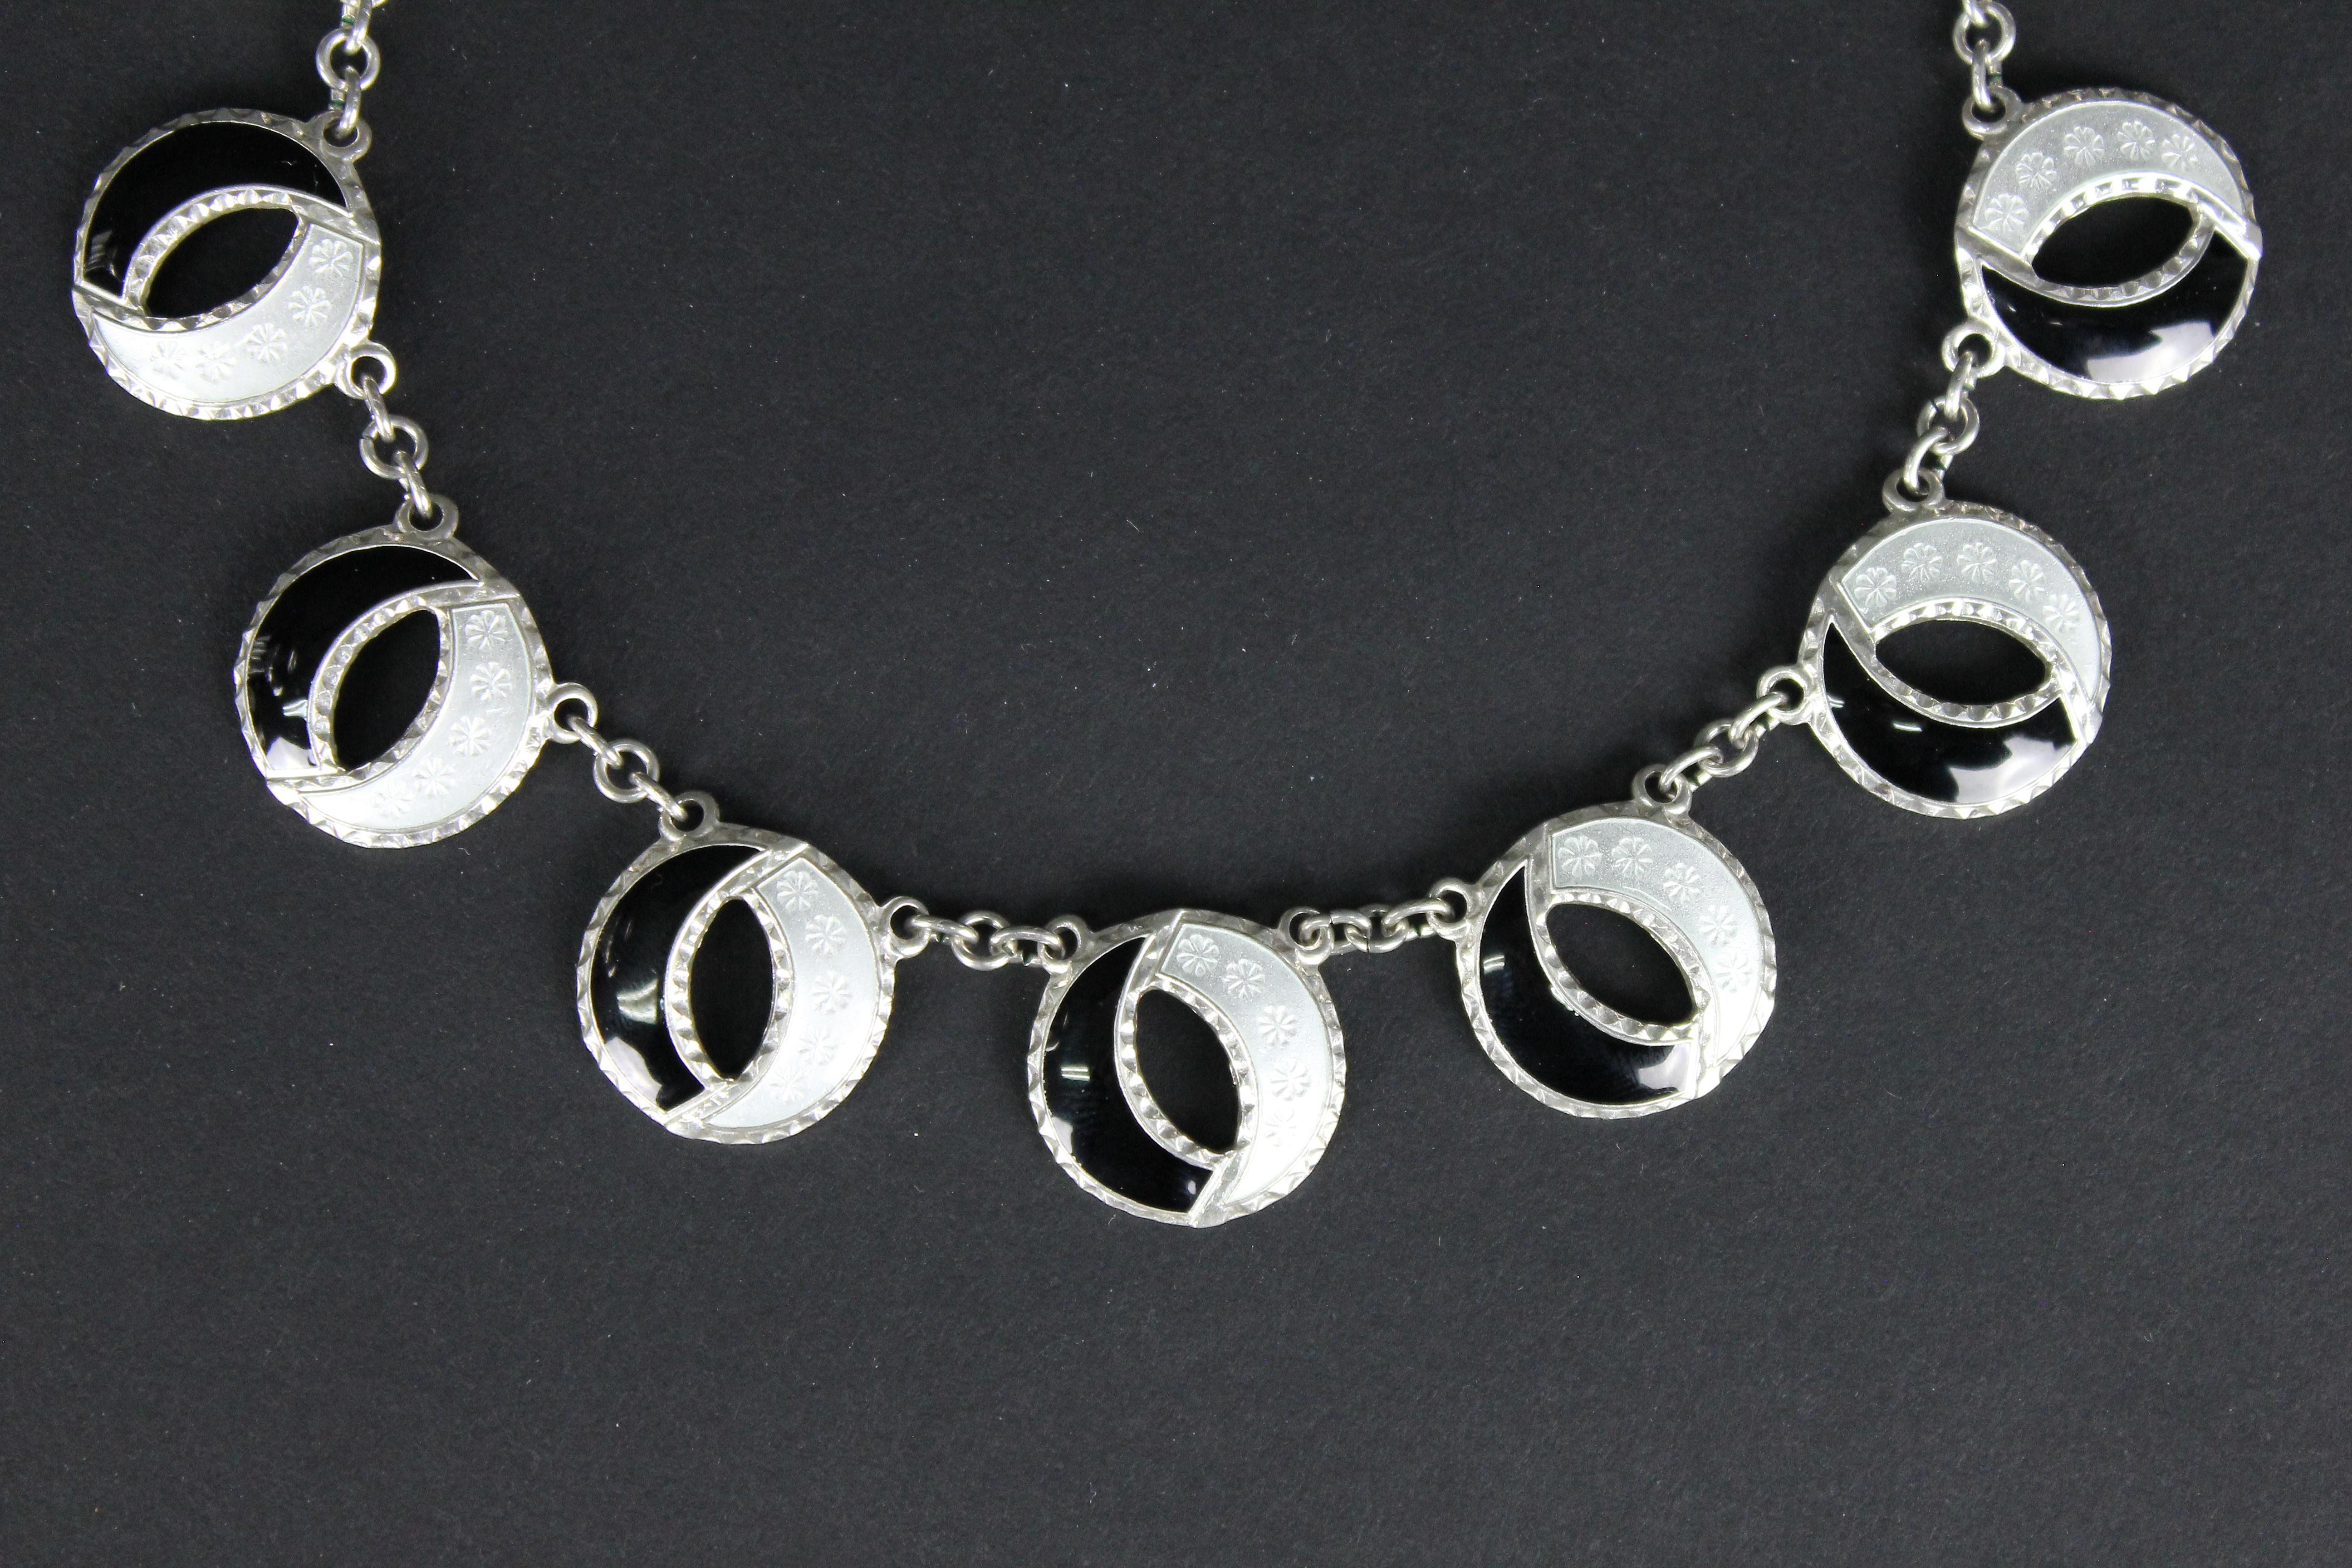 Modernist Andresen & Scheinpflug, Necklace in Sterling Silver and Enamel, Norway, 1940s